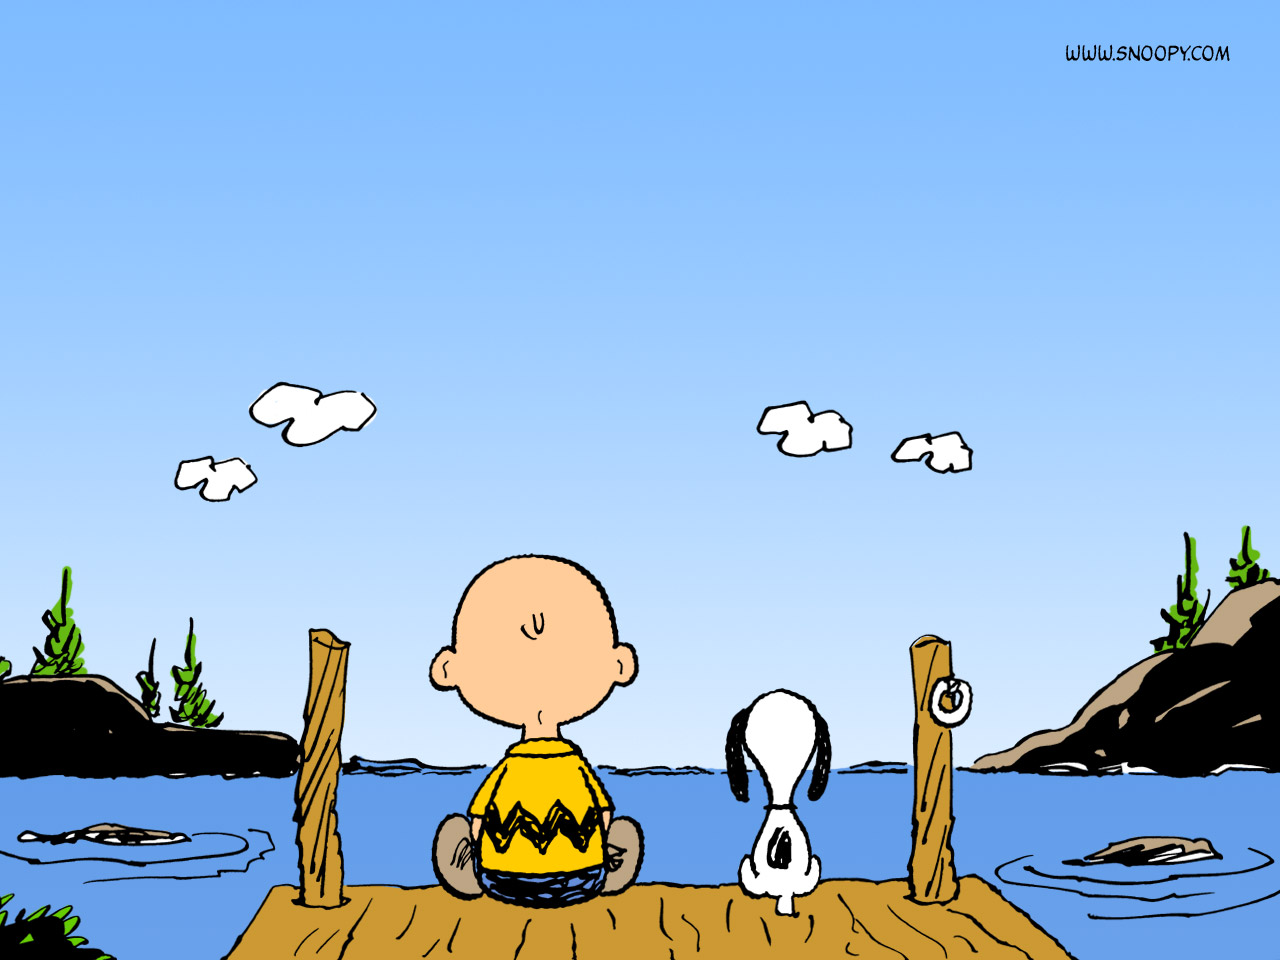 snoopy pic